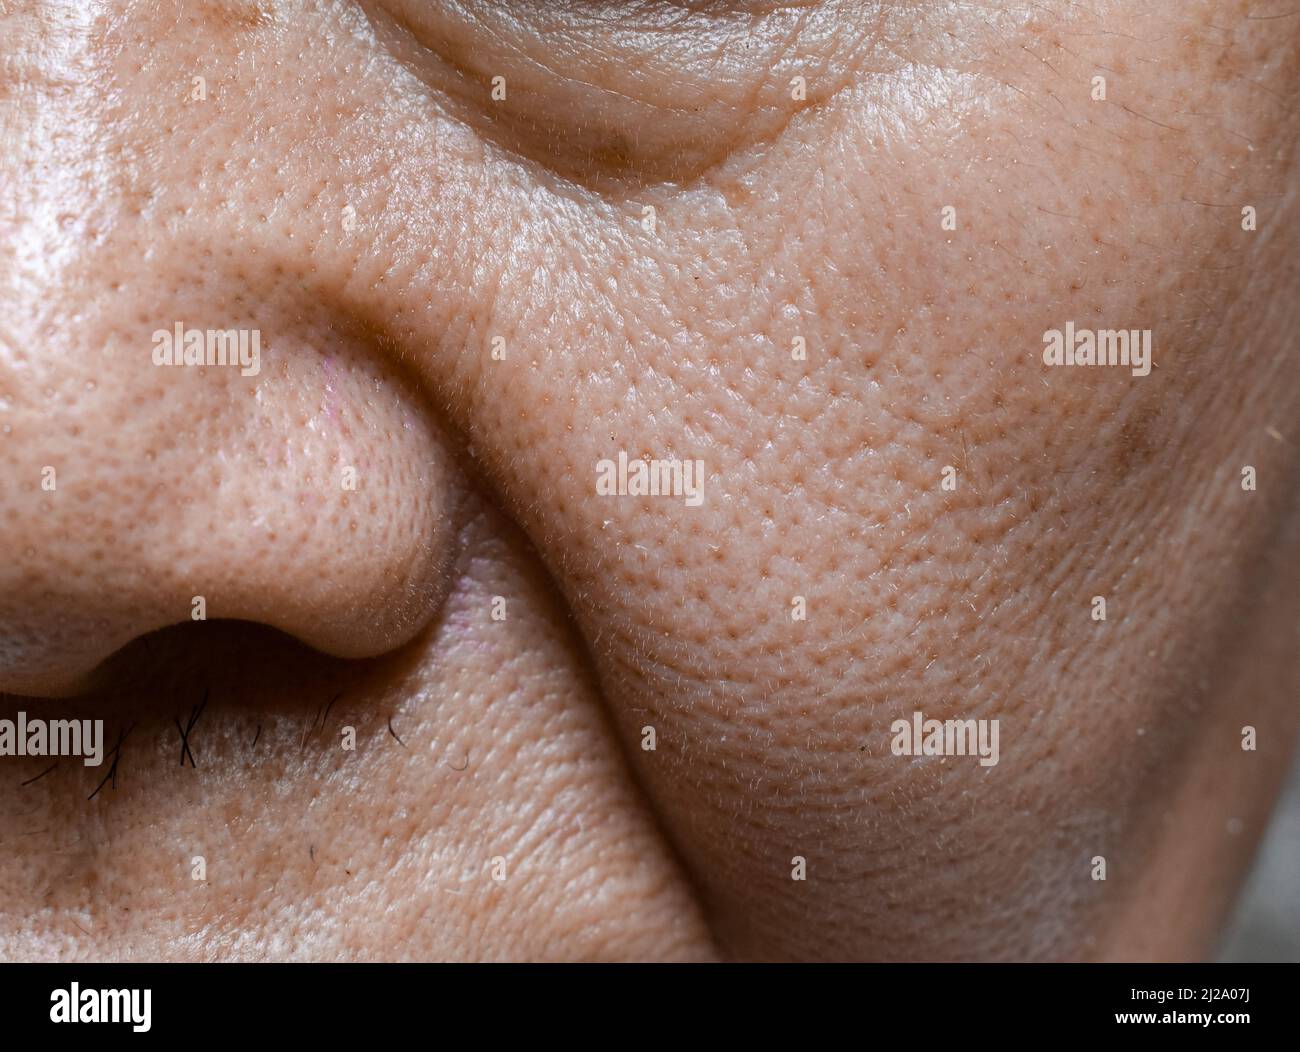 Enlarged pores in face of Southeast Asian, Chinese elder man Stock Photo